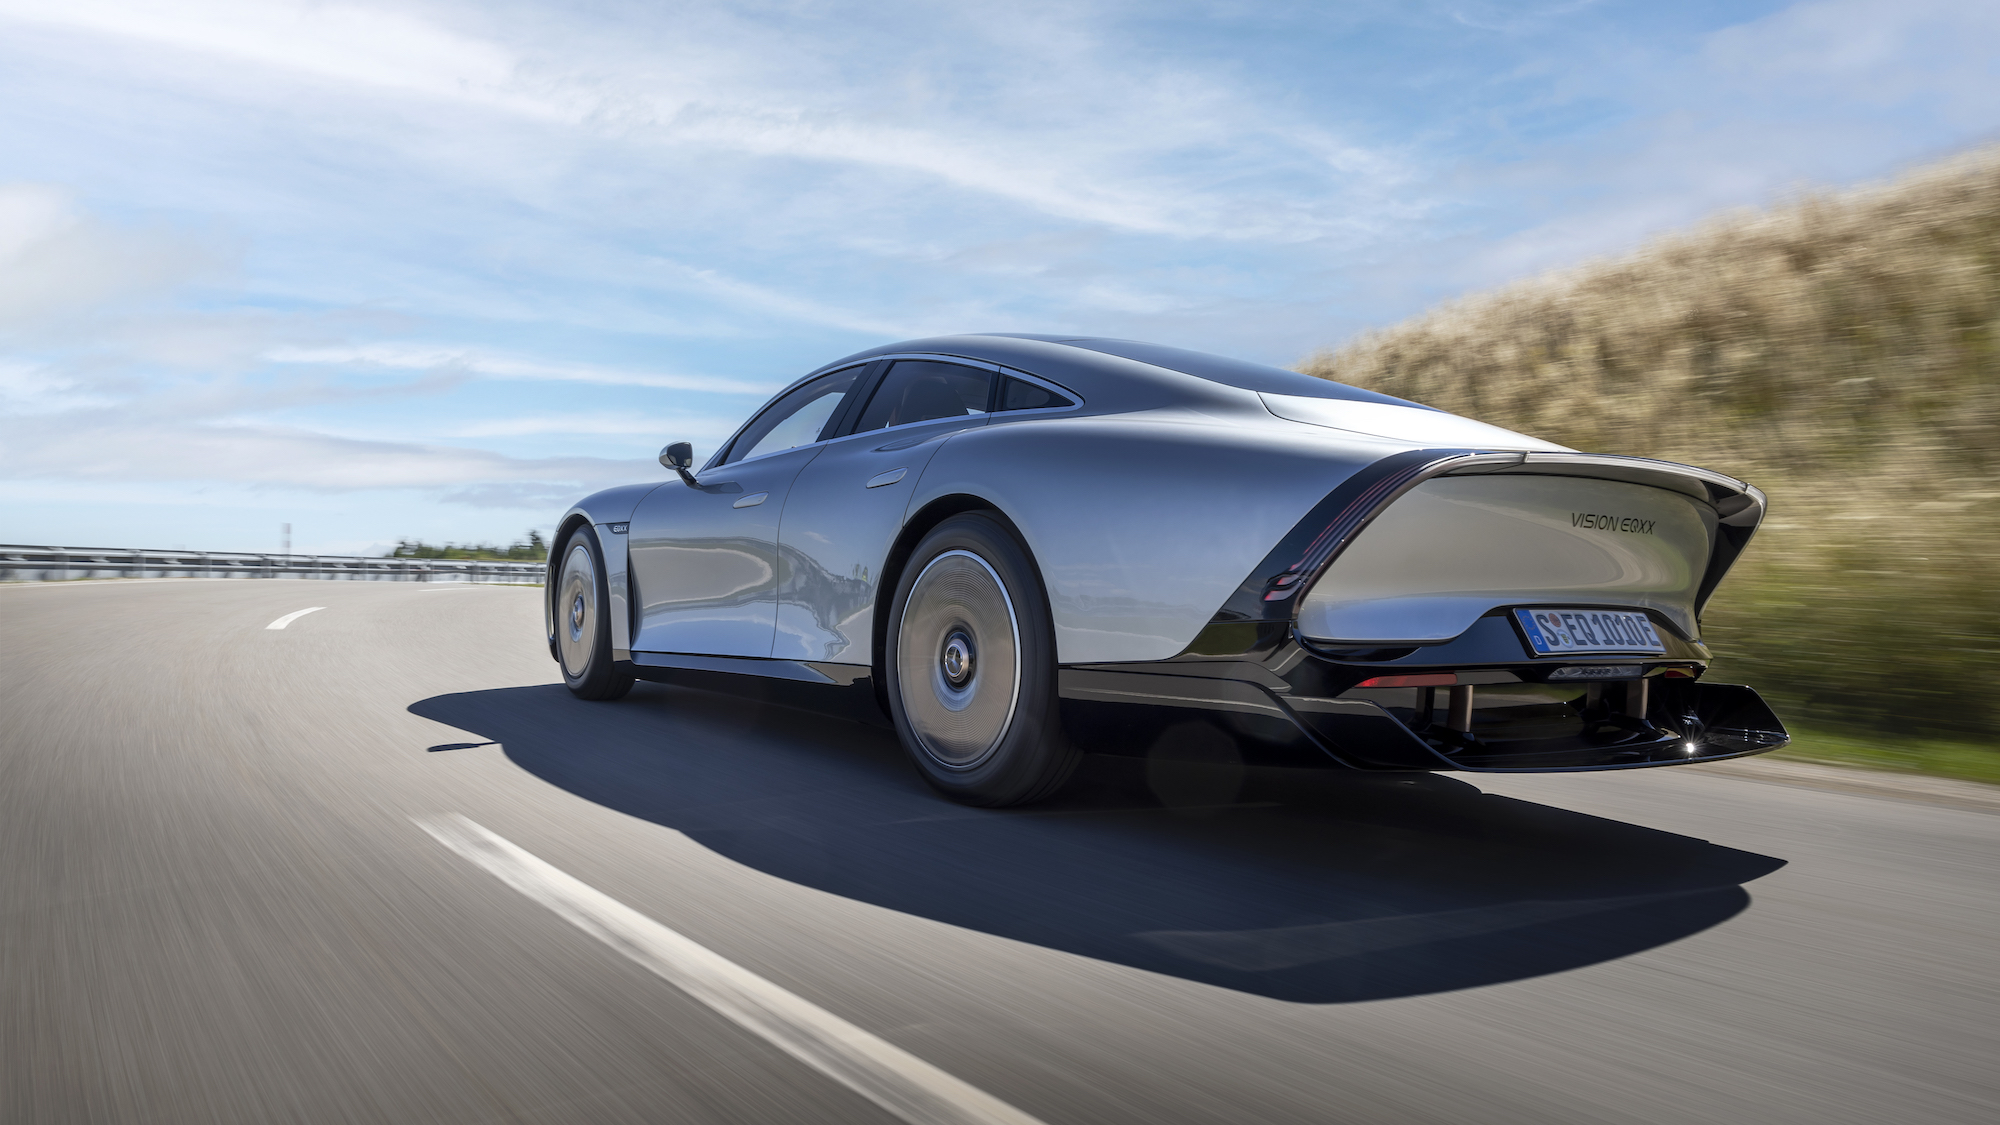 The Mercedes EQXX can travel 621 miles on a charge